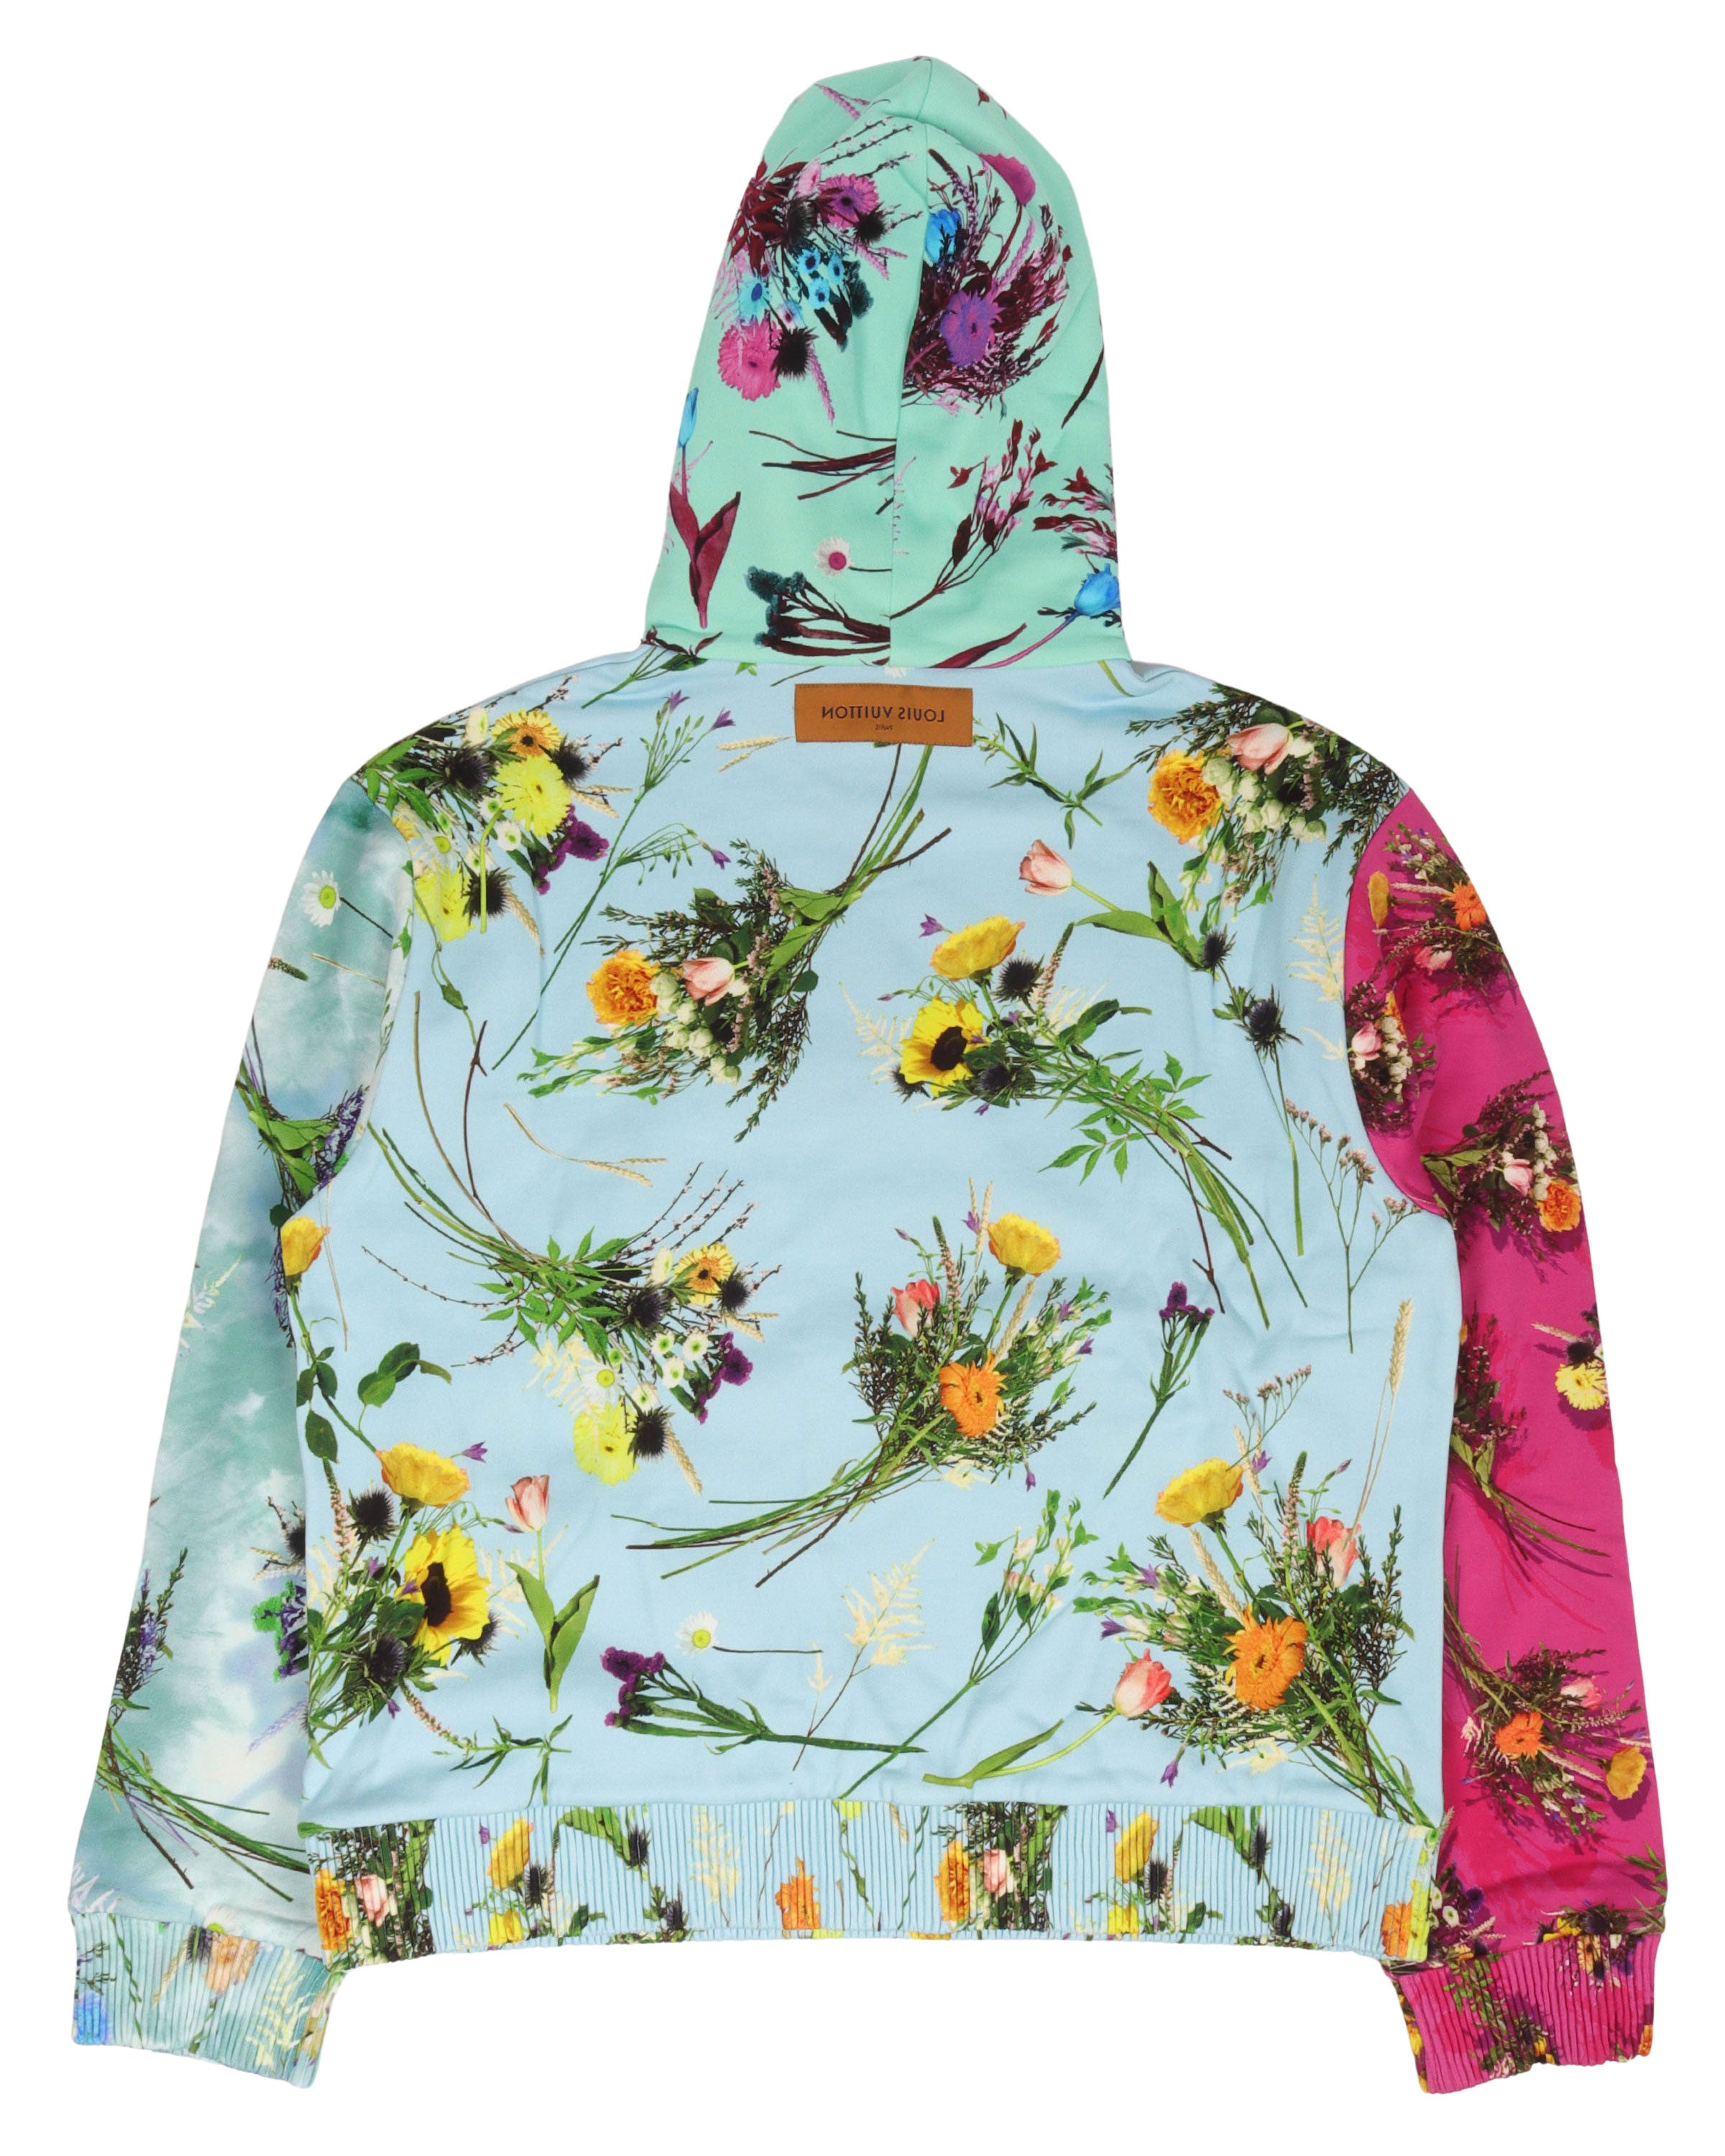 Louis Vuitton Navy And Multicolor Floral Hoodie - Tagotee